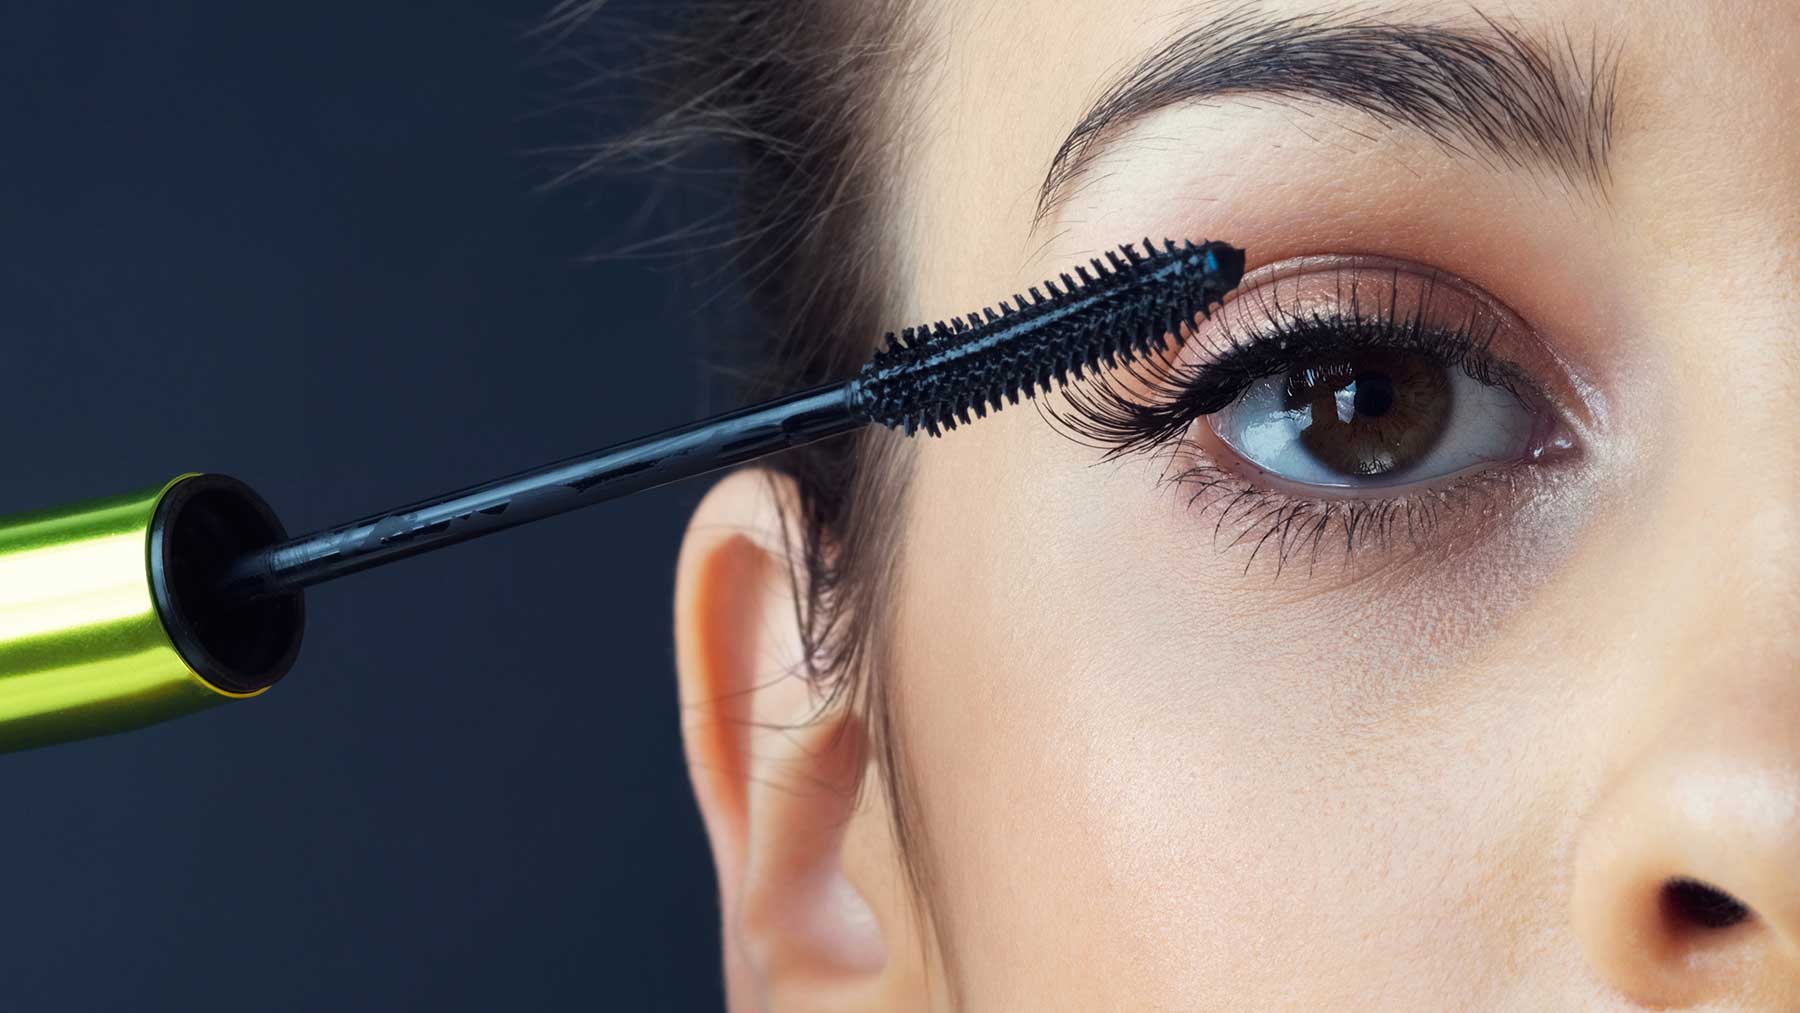 5 alternatives to eyeliner to change your look